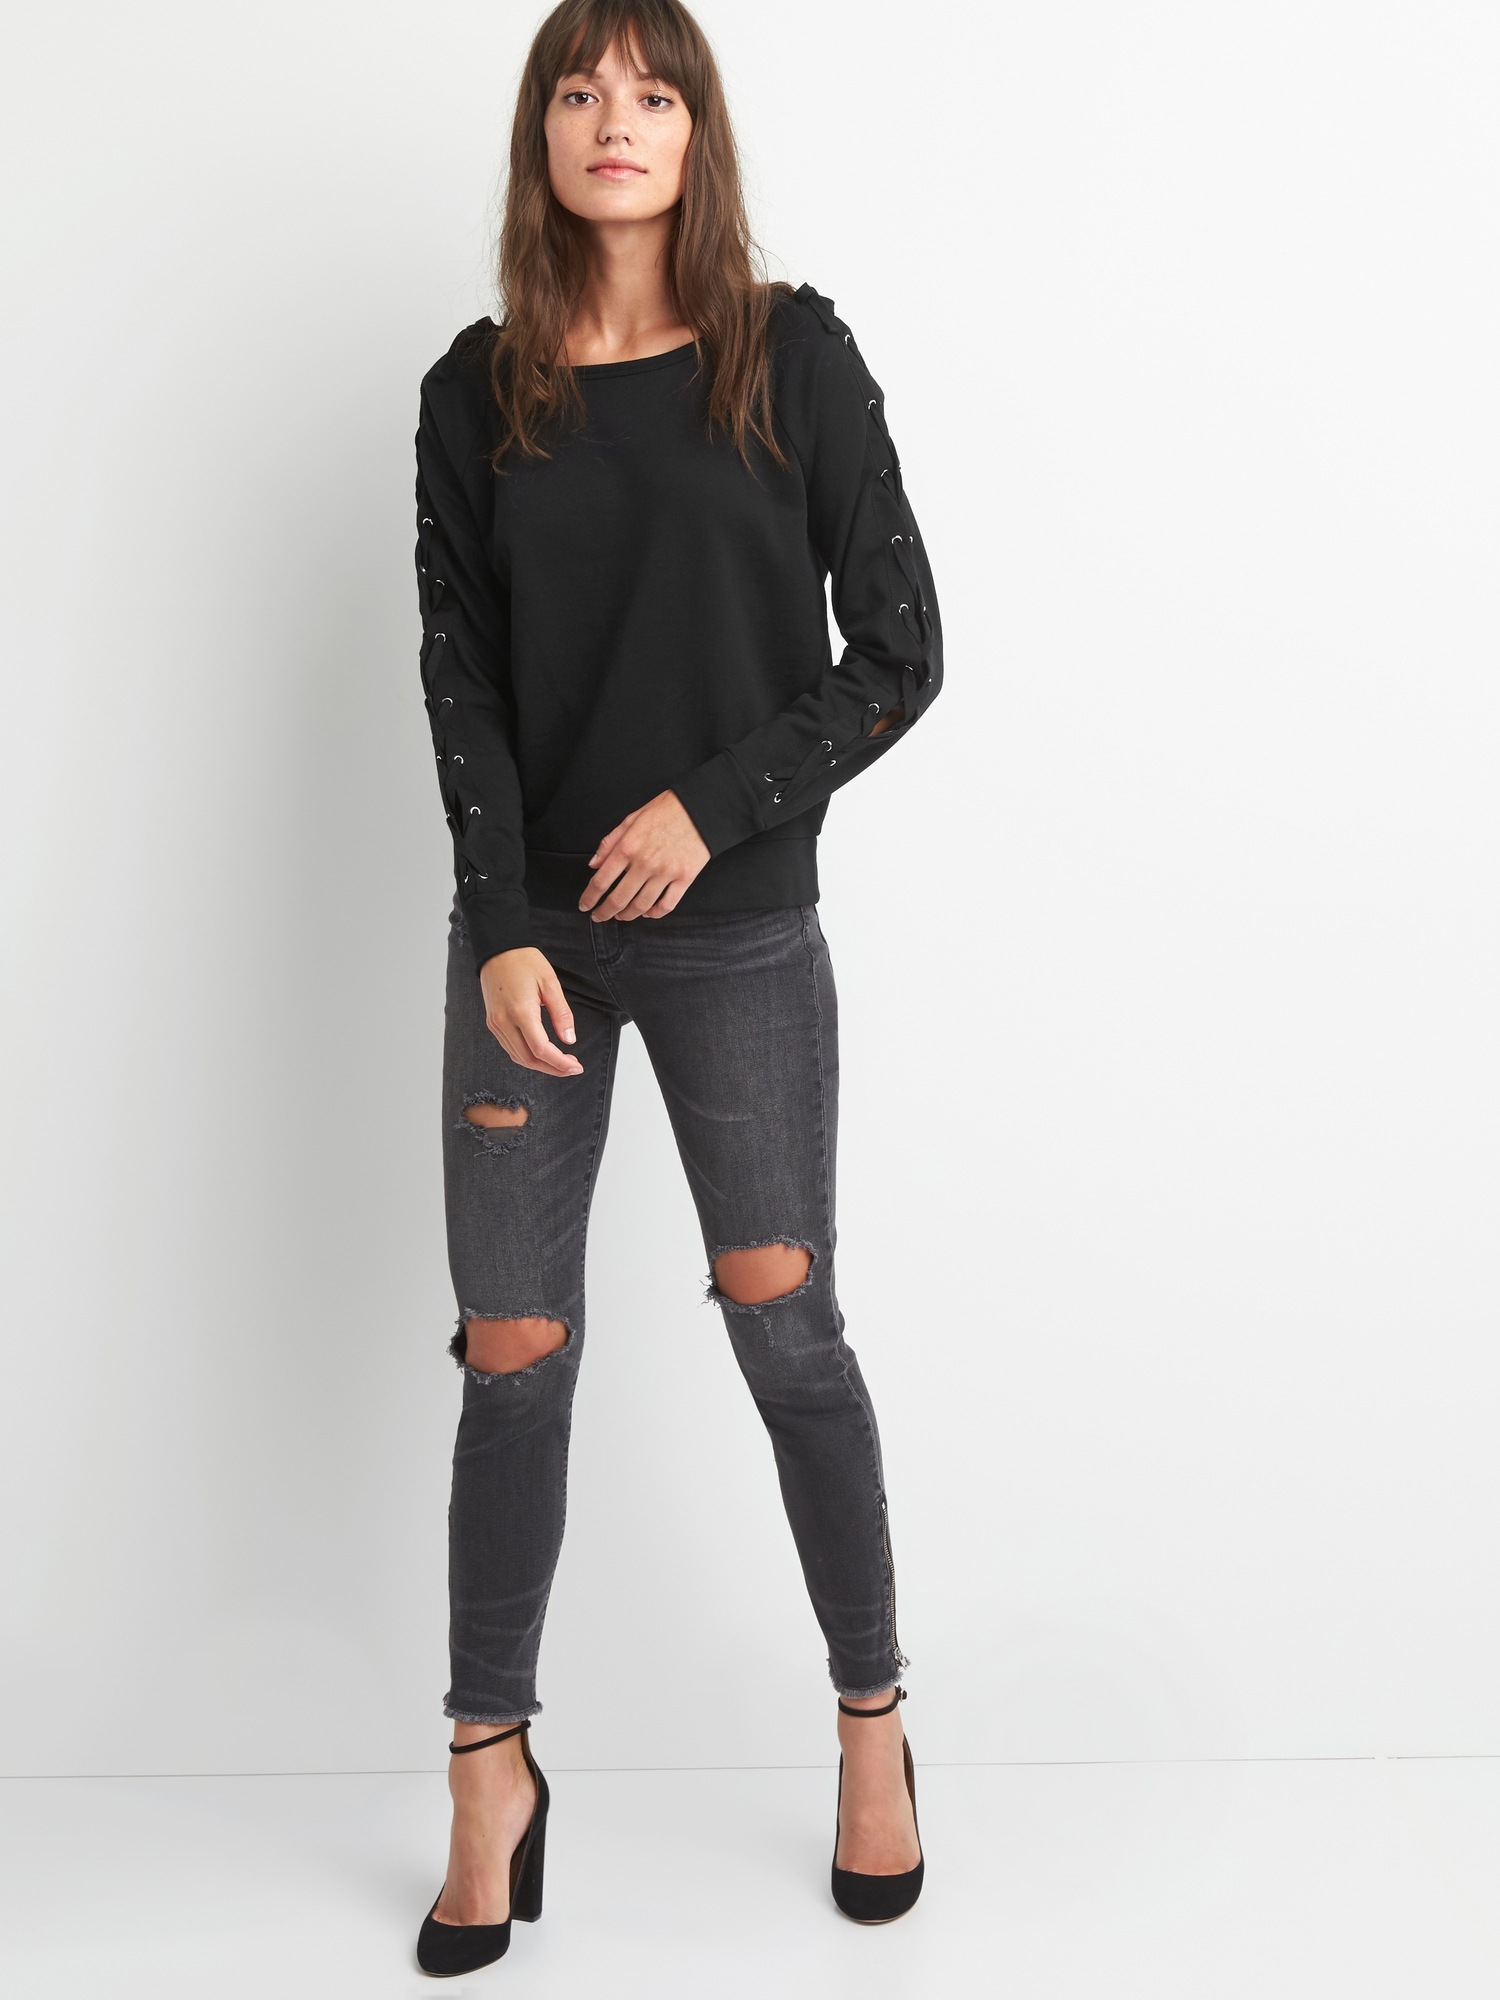 Lace-up sleeve pullover